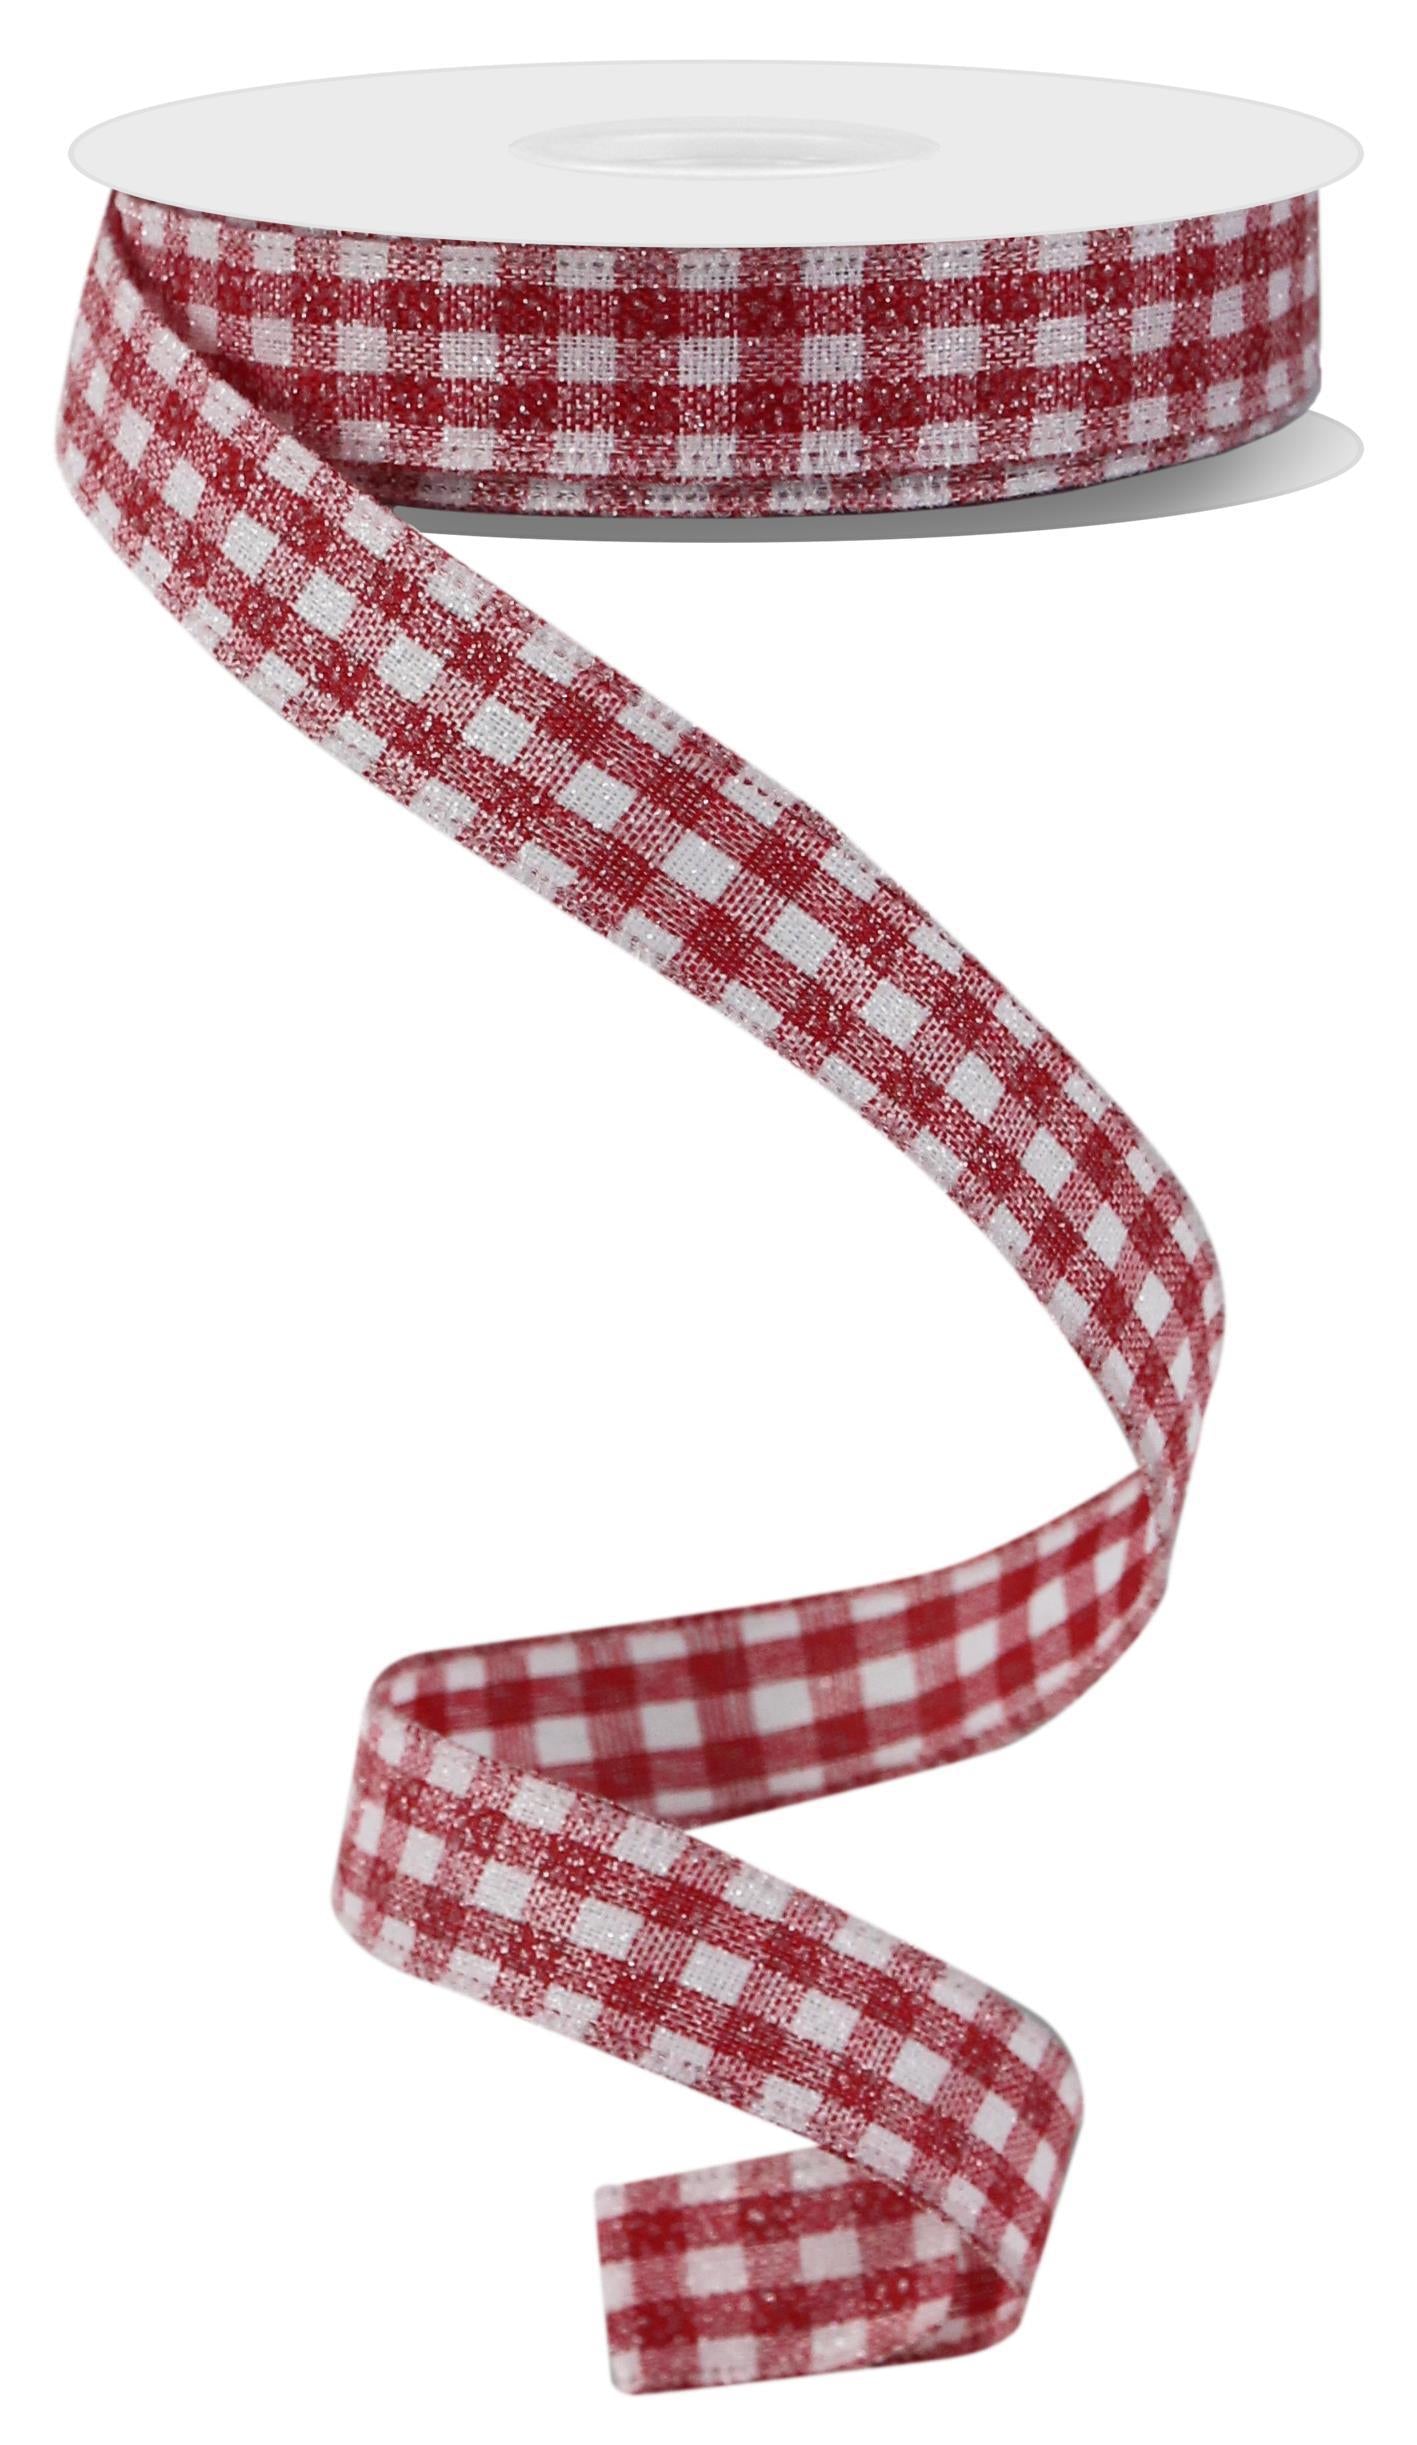 Wired Ribbon * Glitter Gingham Check * Red and White Canvas * 5/8" x 10 Yards * RGE12624